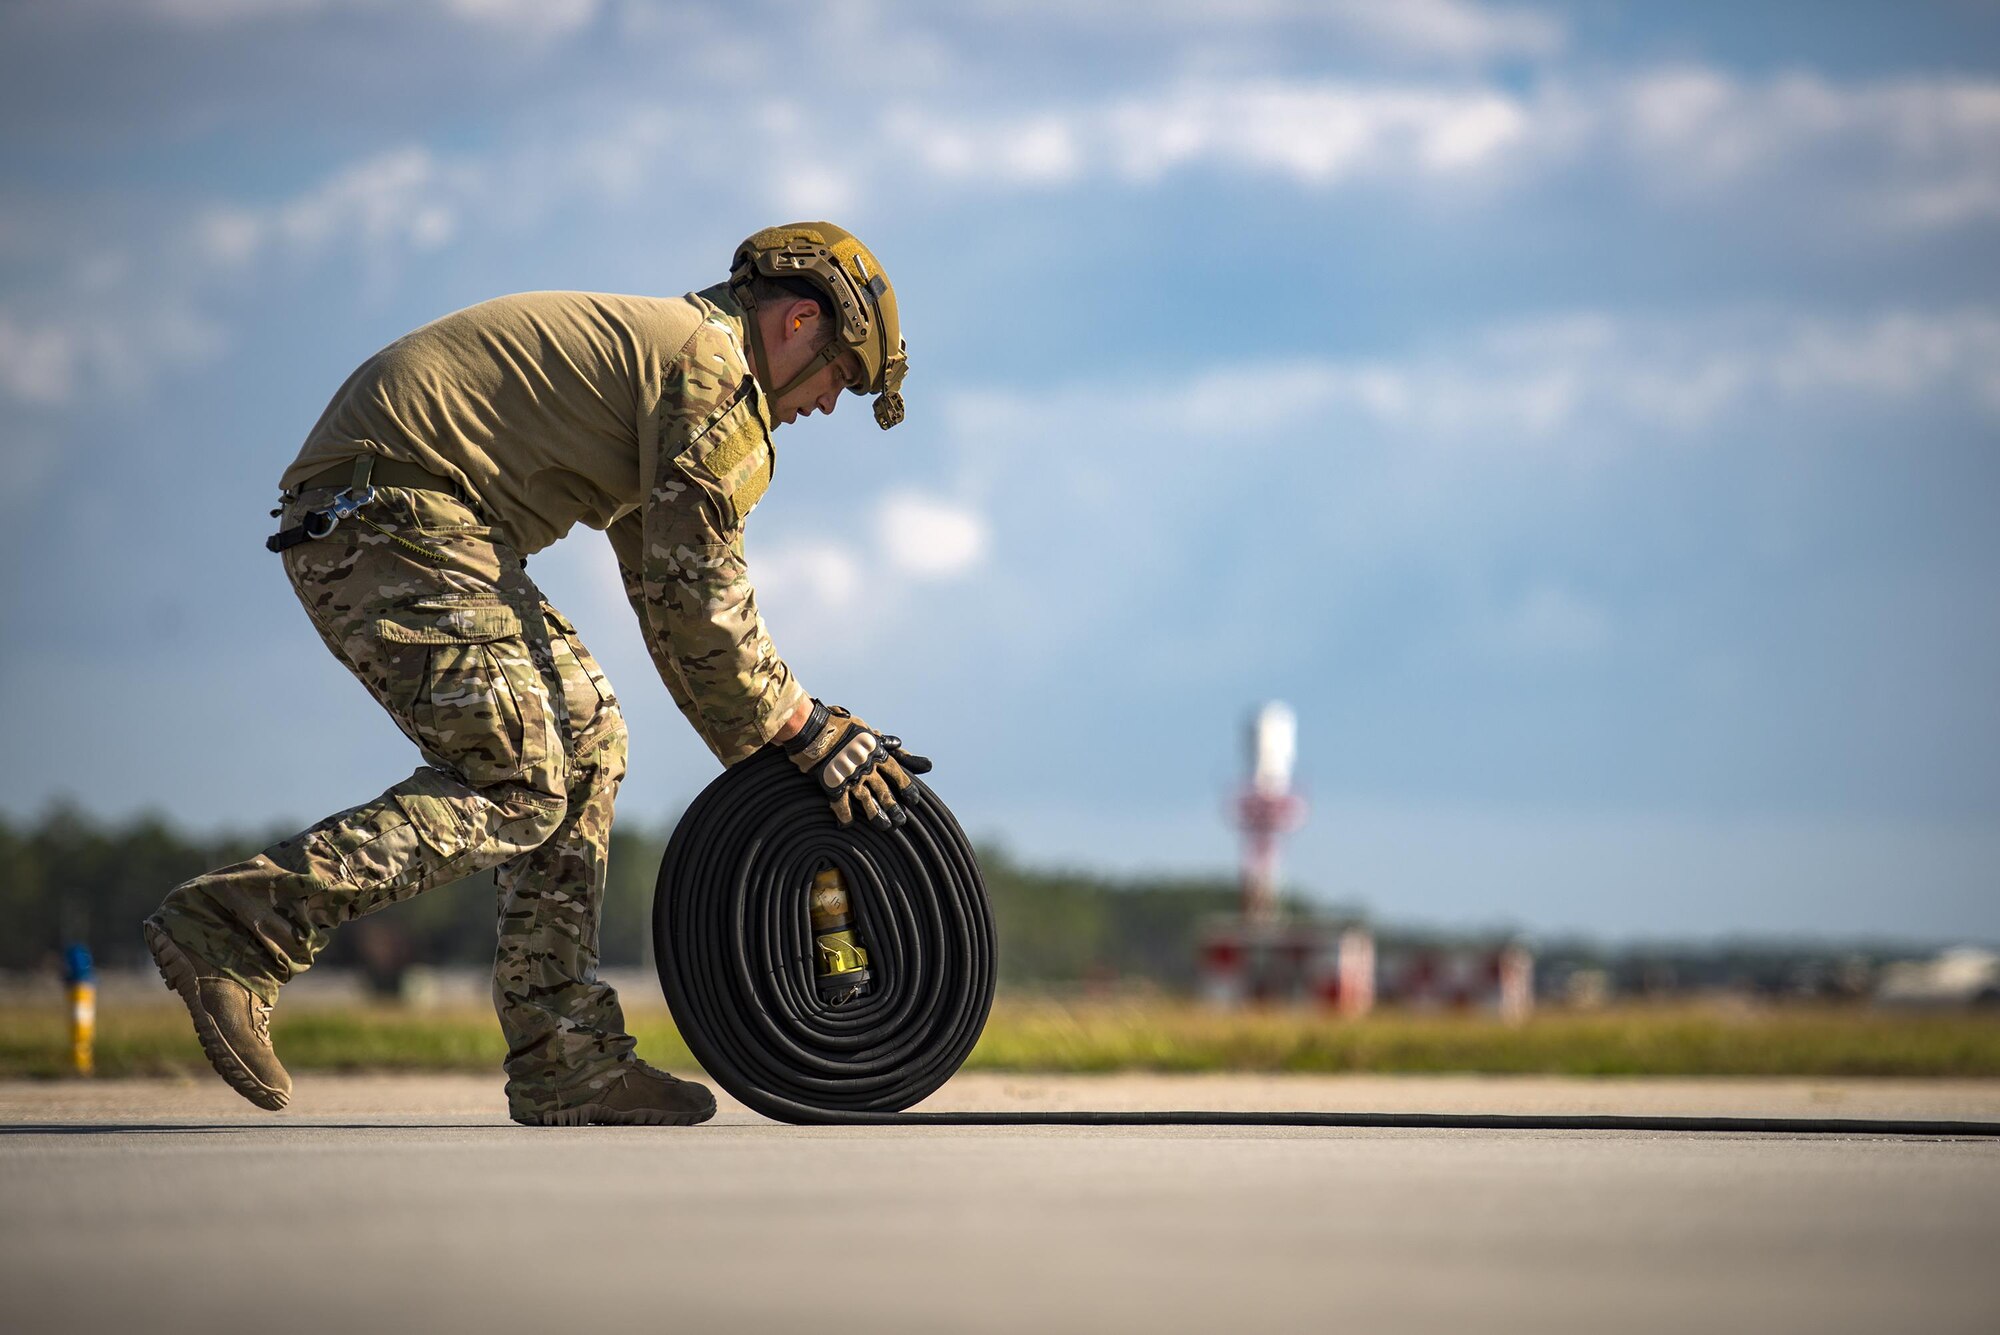 Staff Sgt. Christopher Dessi, 23d Logistics Readiness Squadron forward area refueling point team member, rolls up a hose after refueling an A-10C Thunderbolt II aircraft during a rapid-rescue exercise, Nov. 3, 2016, at Tyndall Air Force Base, Fla.  Moody’s FARP team is one of only two in Air Combat Command and allows the HC-130J Combat King II to fly into any airfield and refuel aircraft on the ground so they can quickly return to the fight. (U.S. Air Force photo by Staff Sgt. Ryan Callaghan)
